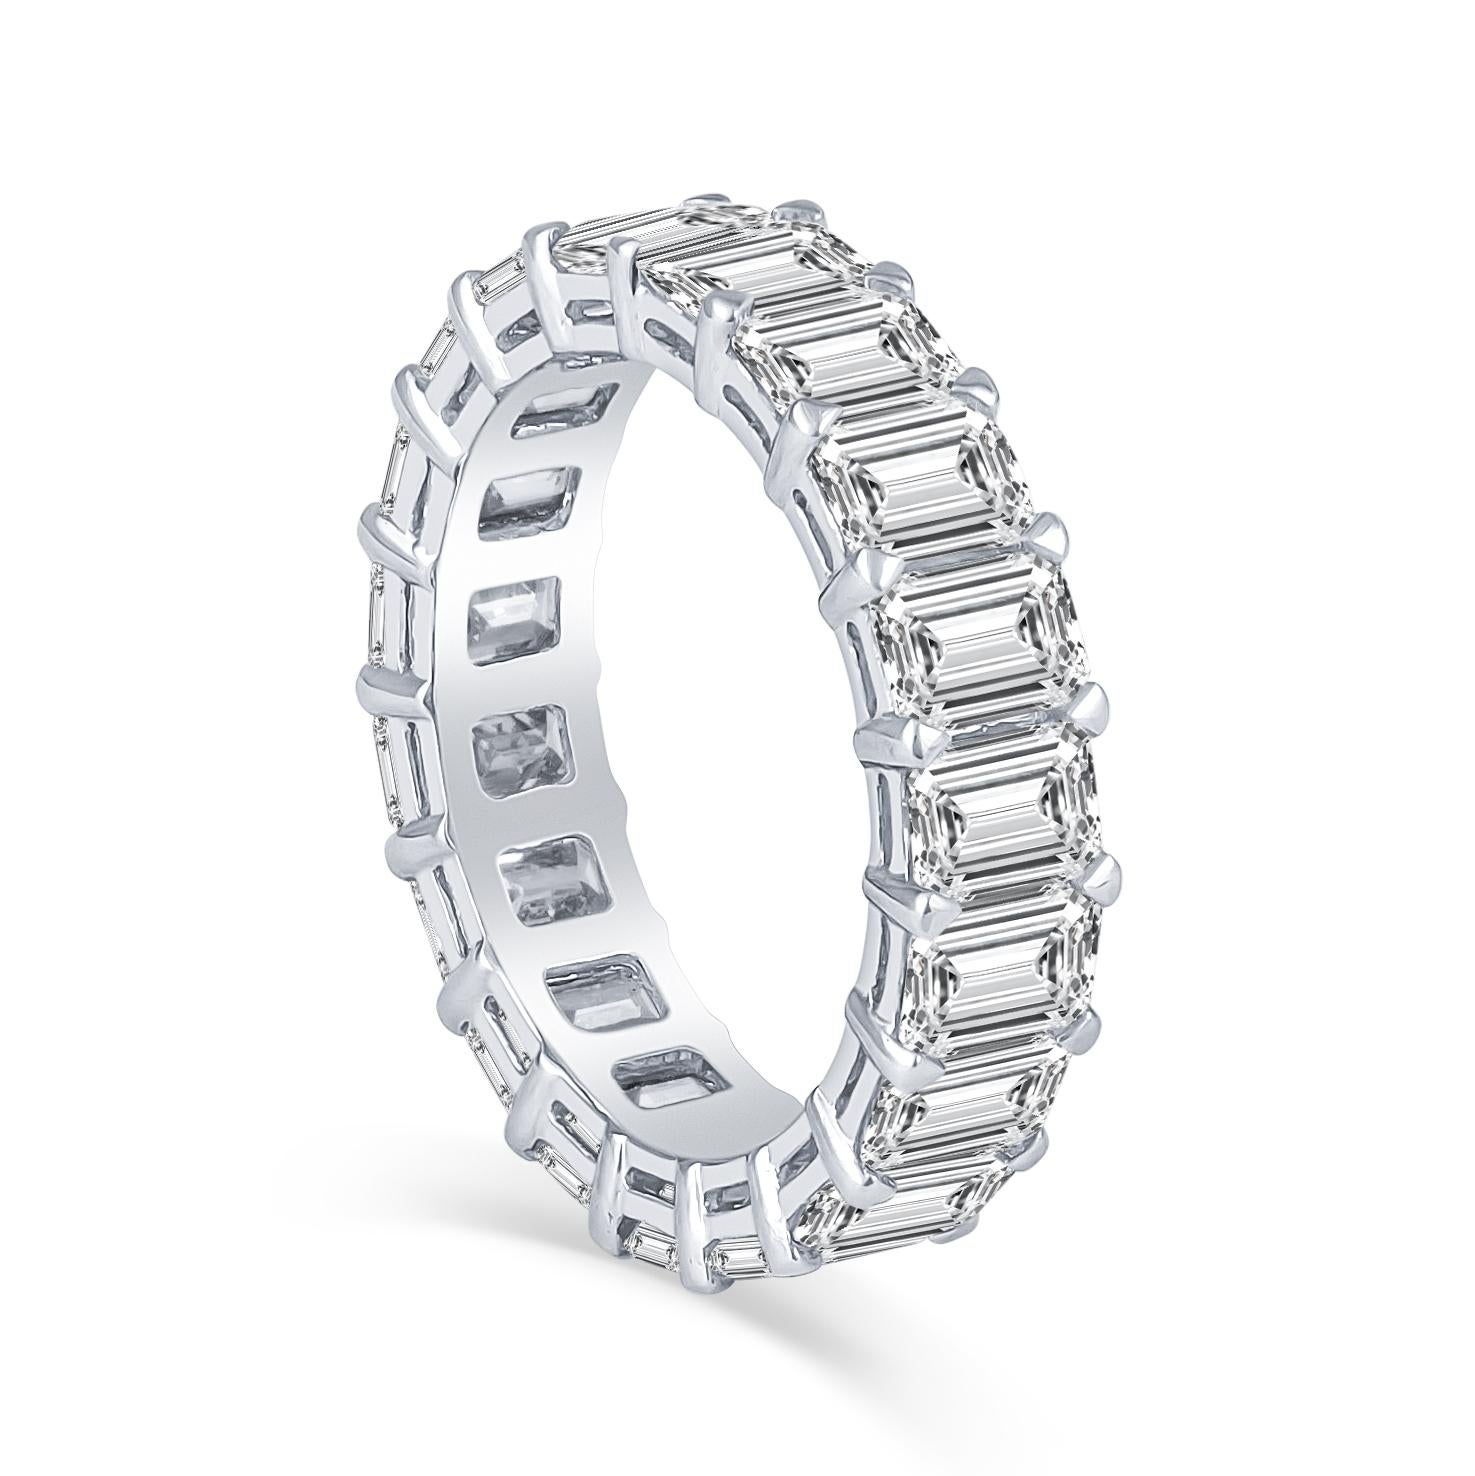 This 5.79ct total weight emerald cut diamond eternity band was custom manufactured in-house and each diamond was meticulously matched by our owners. The diamonds were sourced from the same supplier who supplies custom cut diamonds to some of the